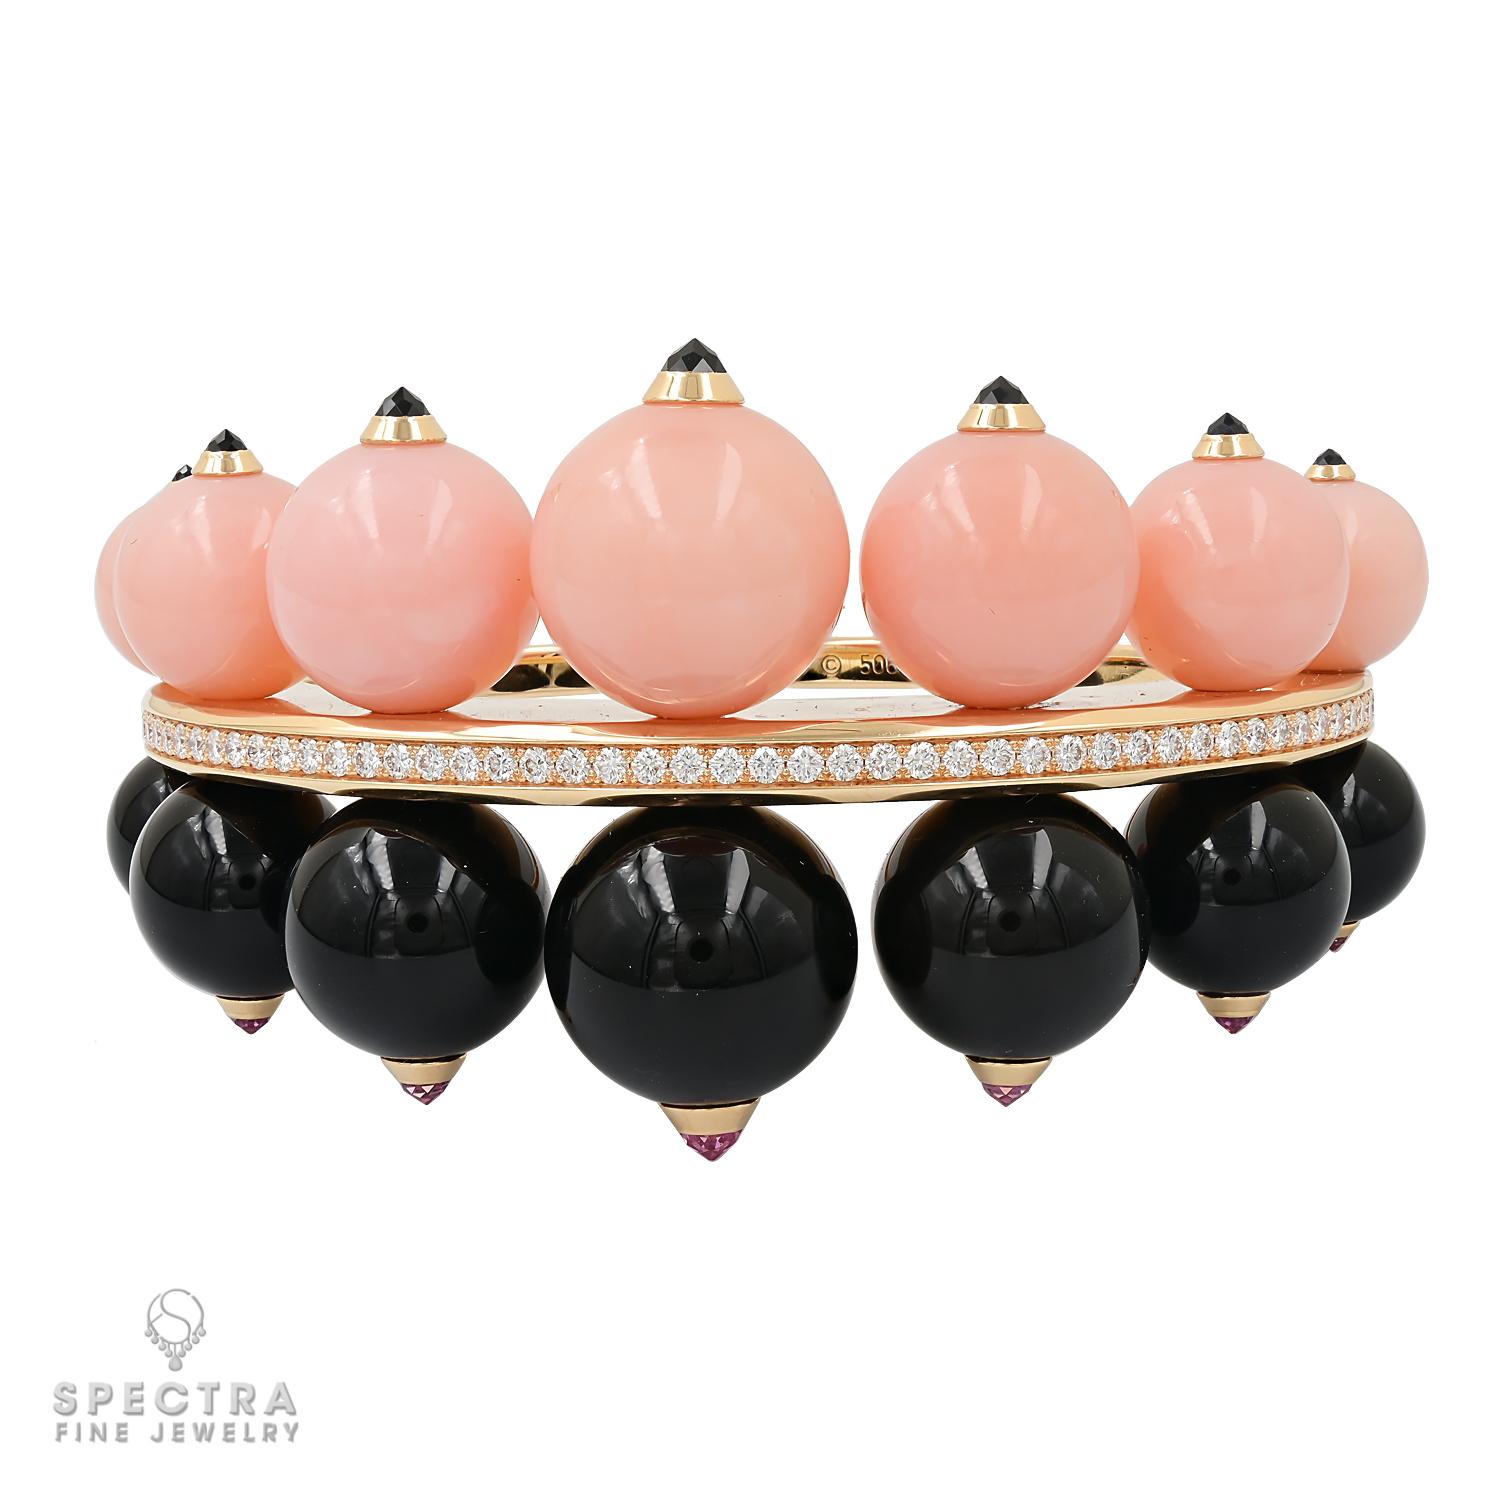 Presenting this Pink Opal Onyx Diamond Bangle made by Cartier in 2010s - a sublime expression of opulence and sophistication. This luxurious creation harmoniously combines the enduring charm of pink opal, black onyx, and radiant diamonds, all